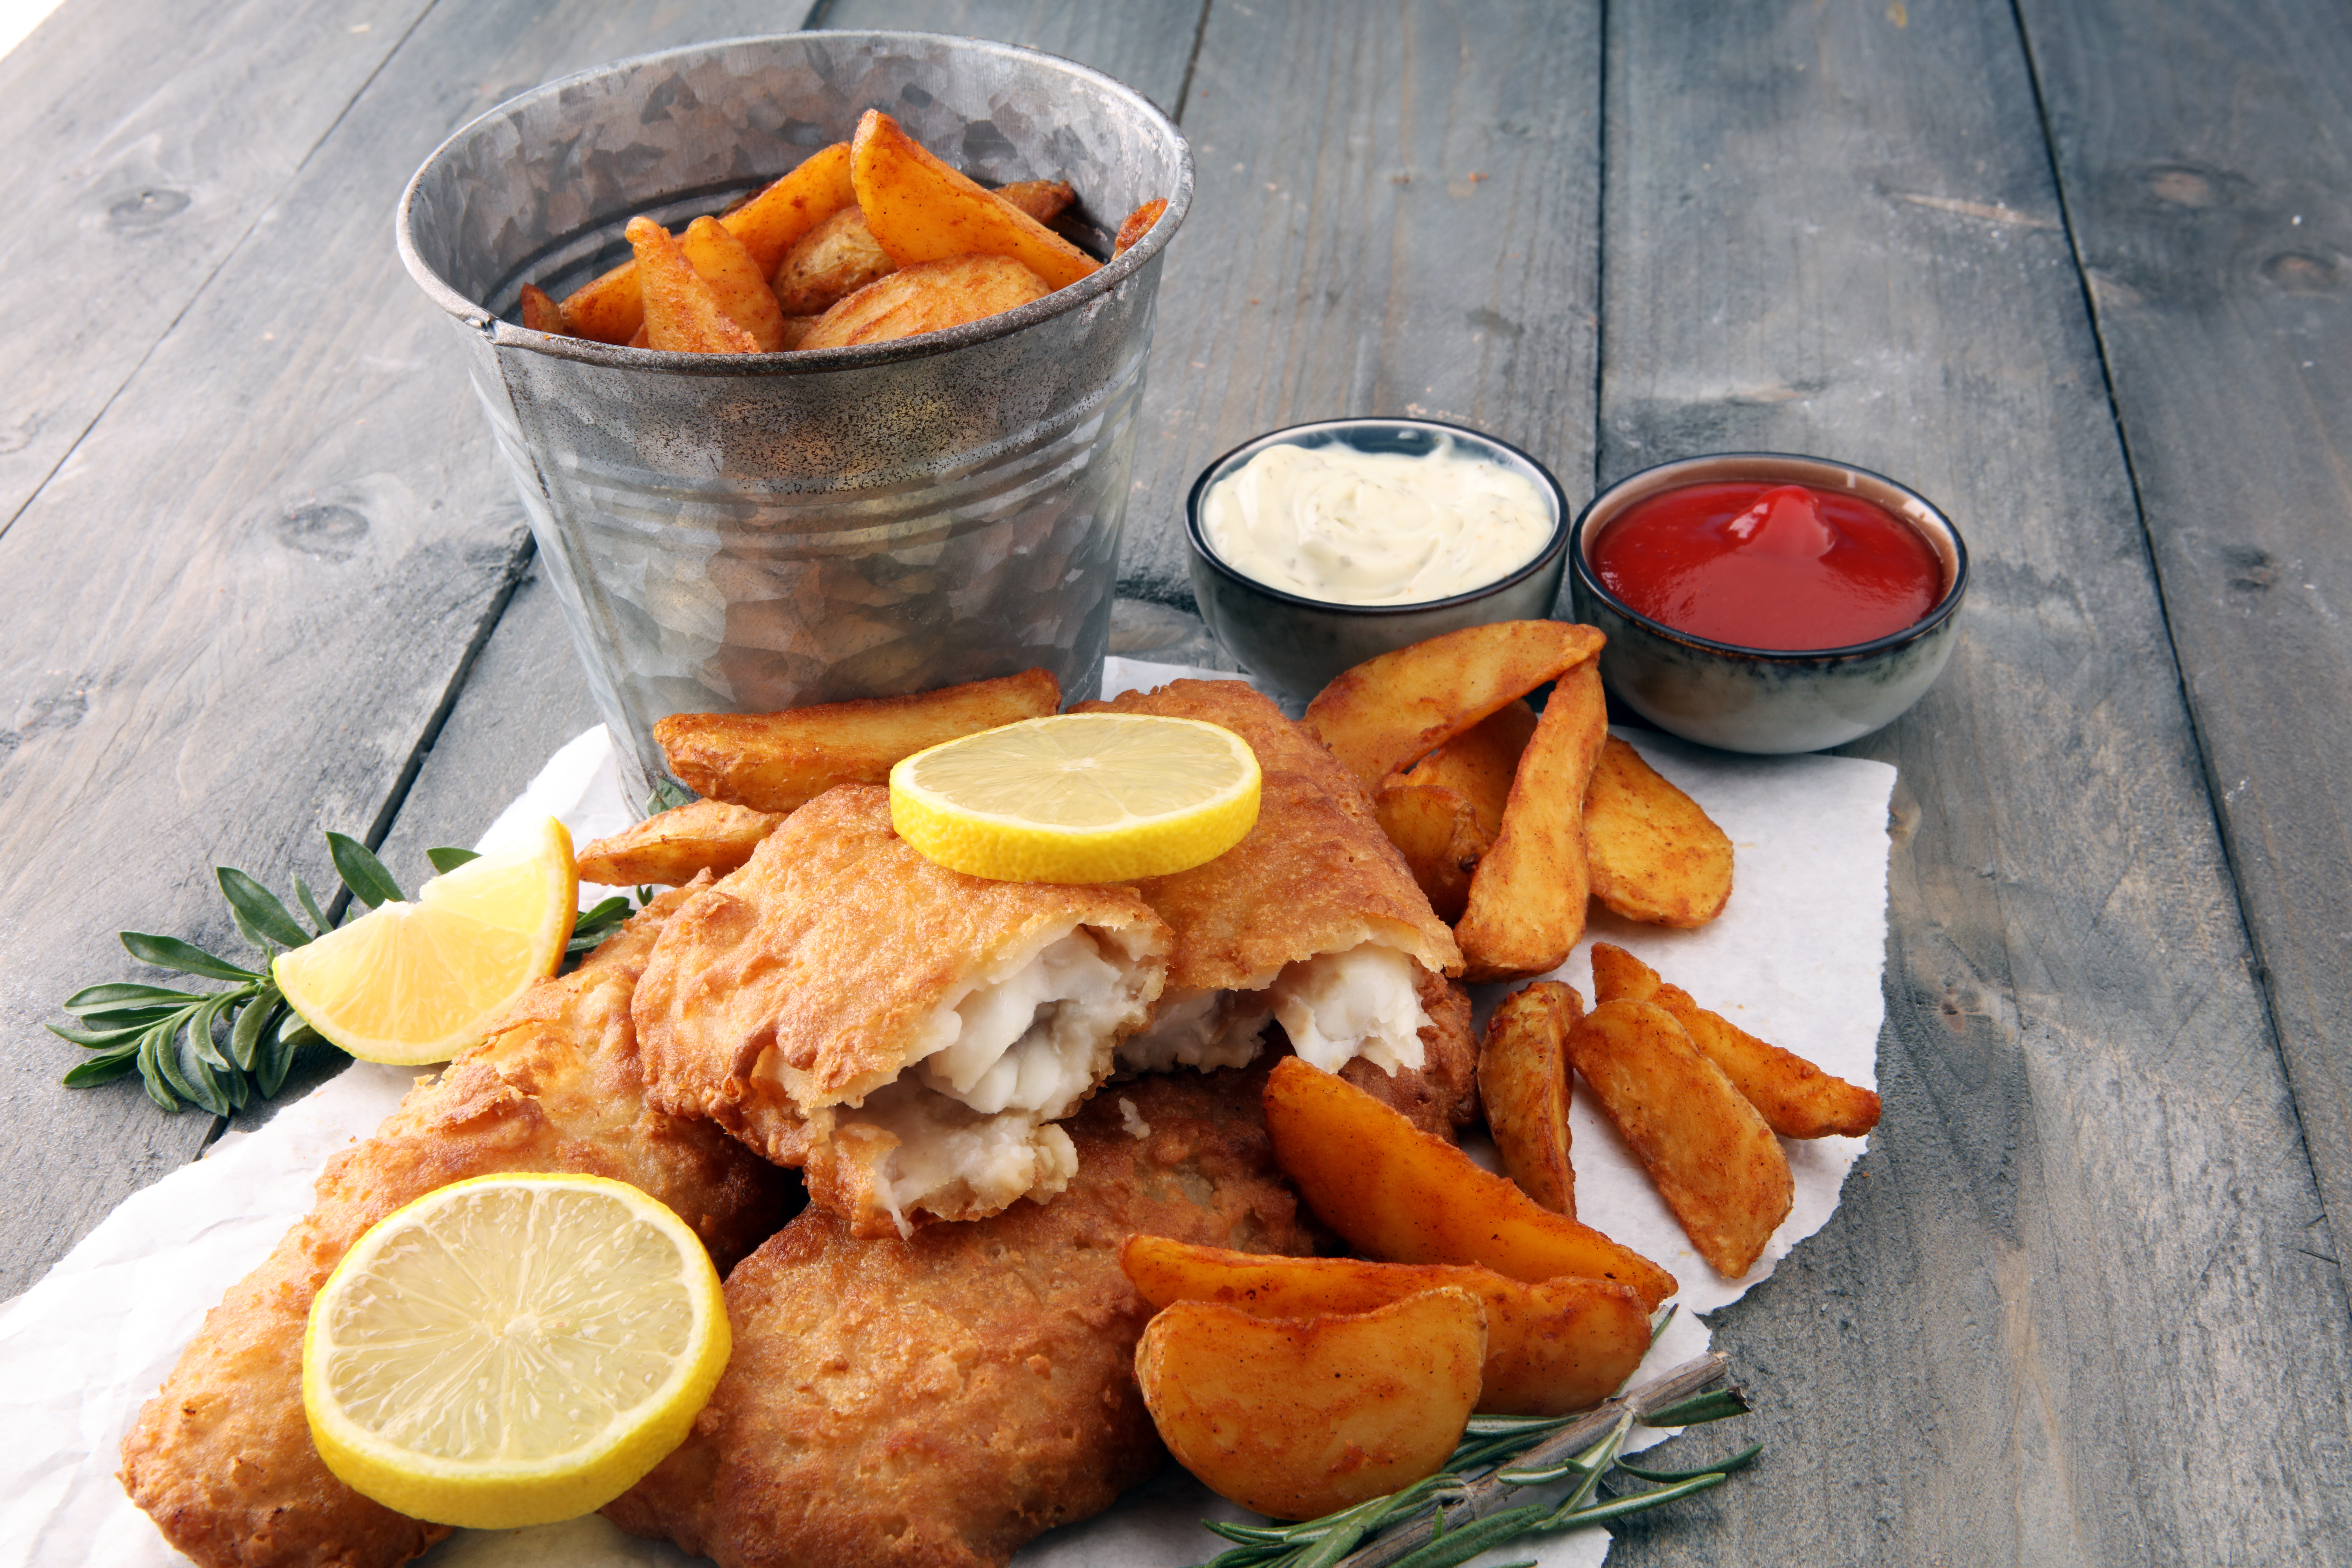 Yummy Street Foods to Try During Family Vacations - Fish and Chips in the UK